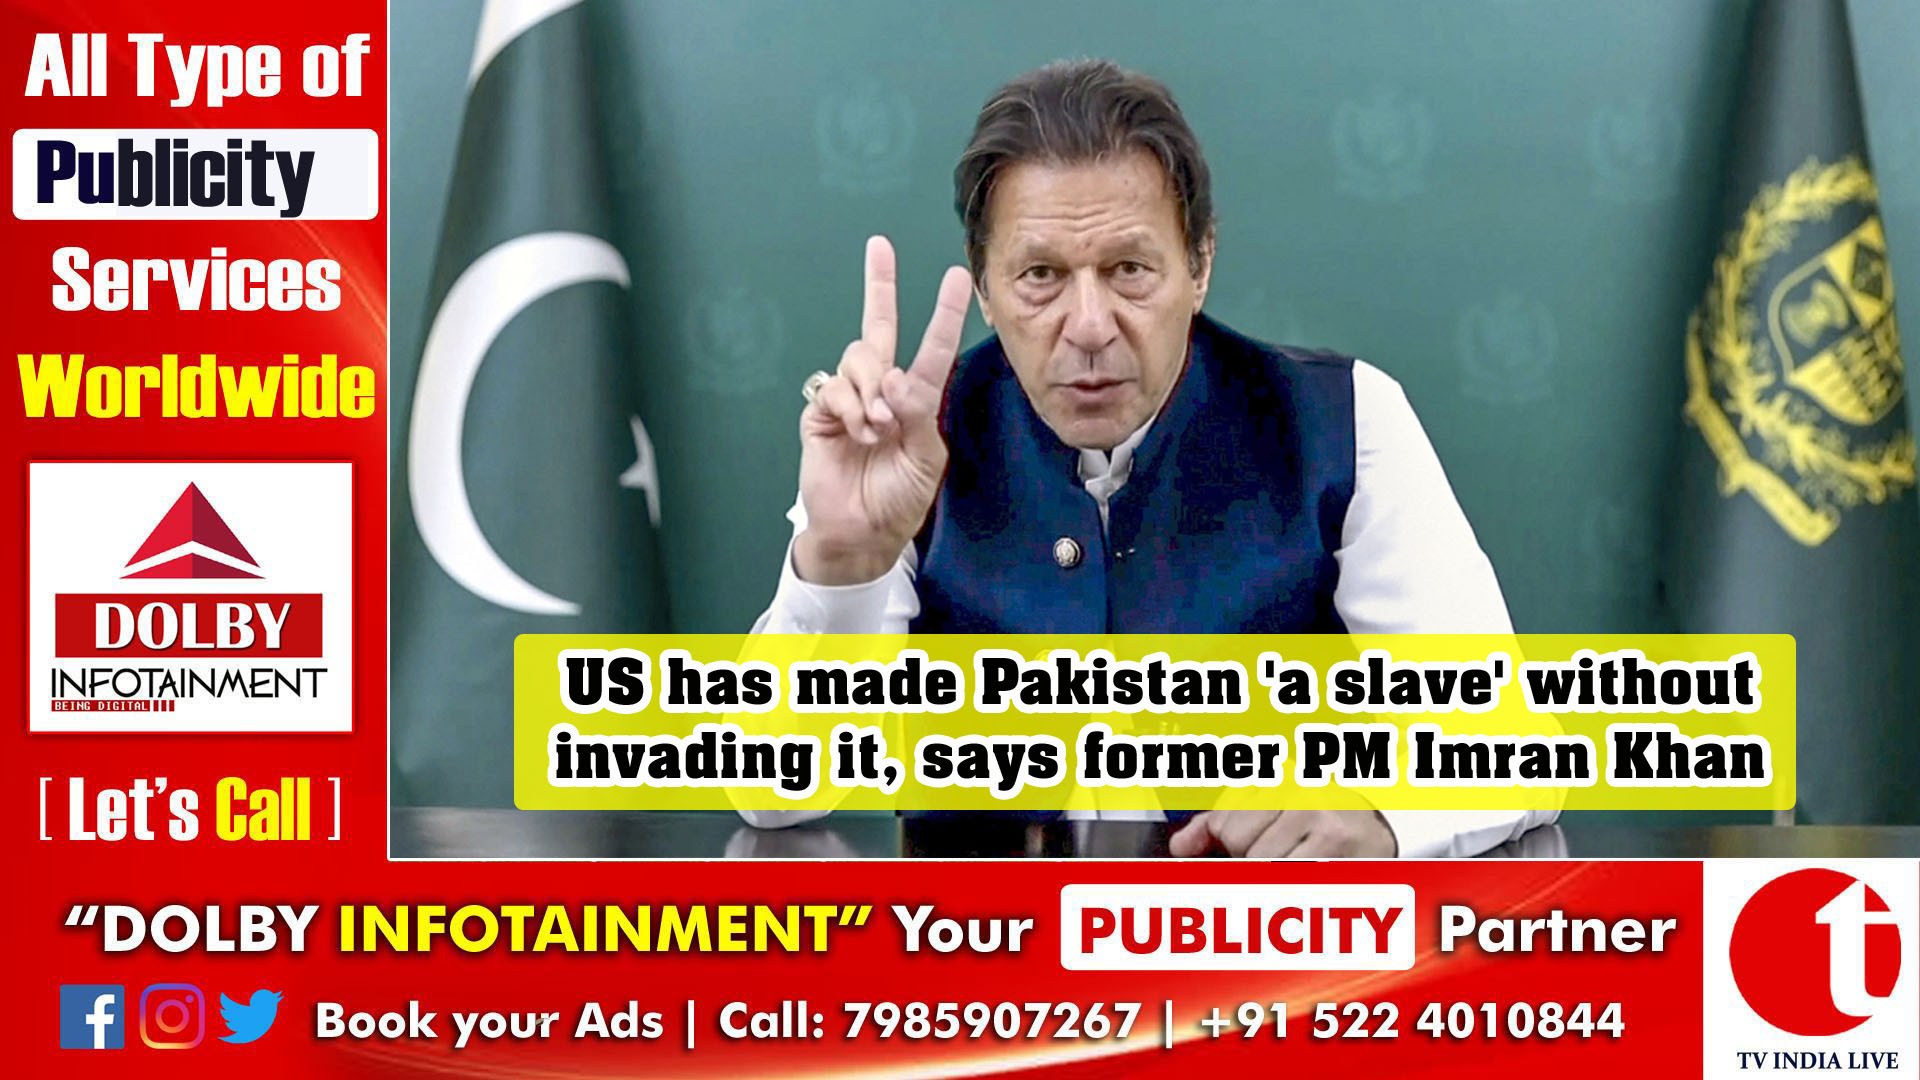 US has made Pakistan 'a slave' without invading it, says former PM Imran Khan